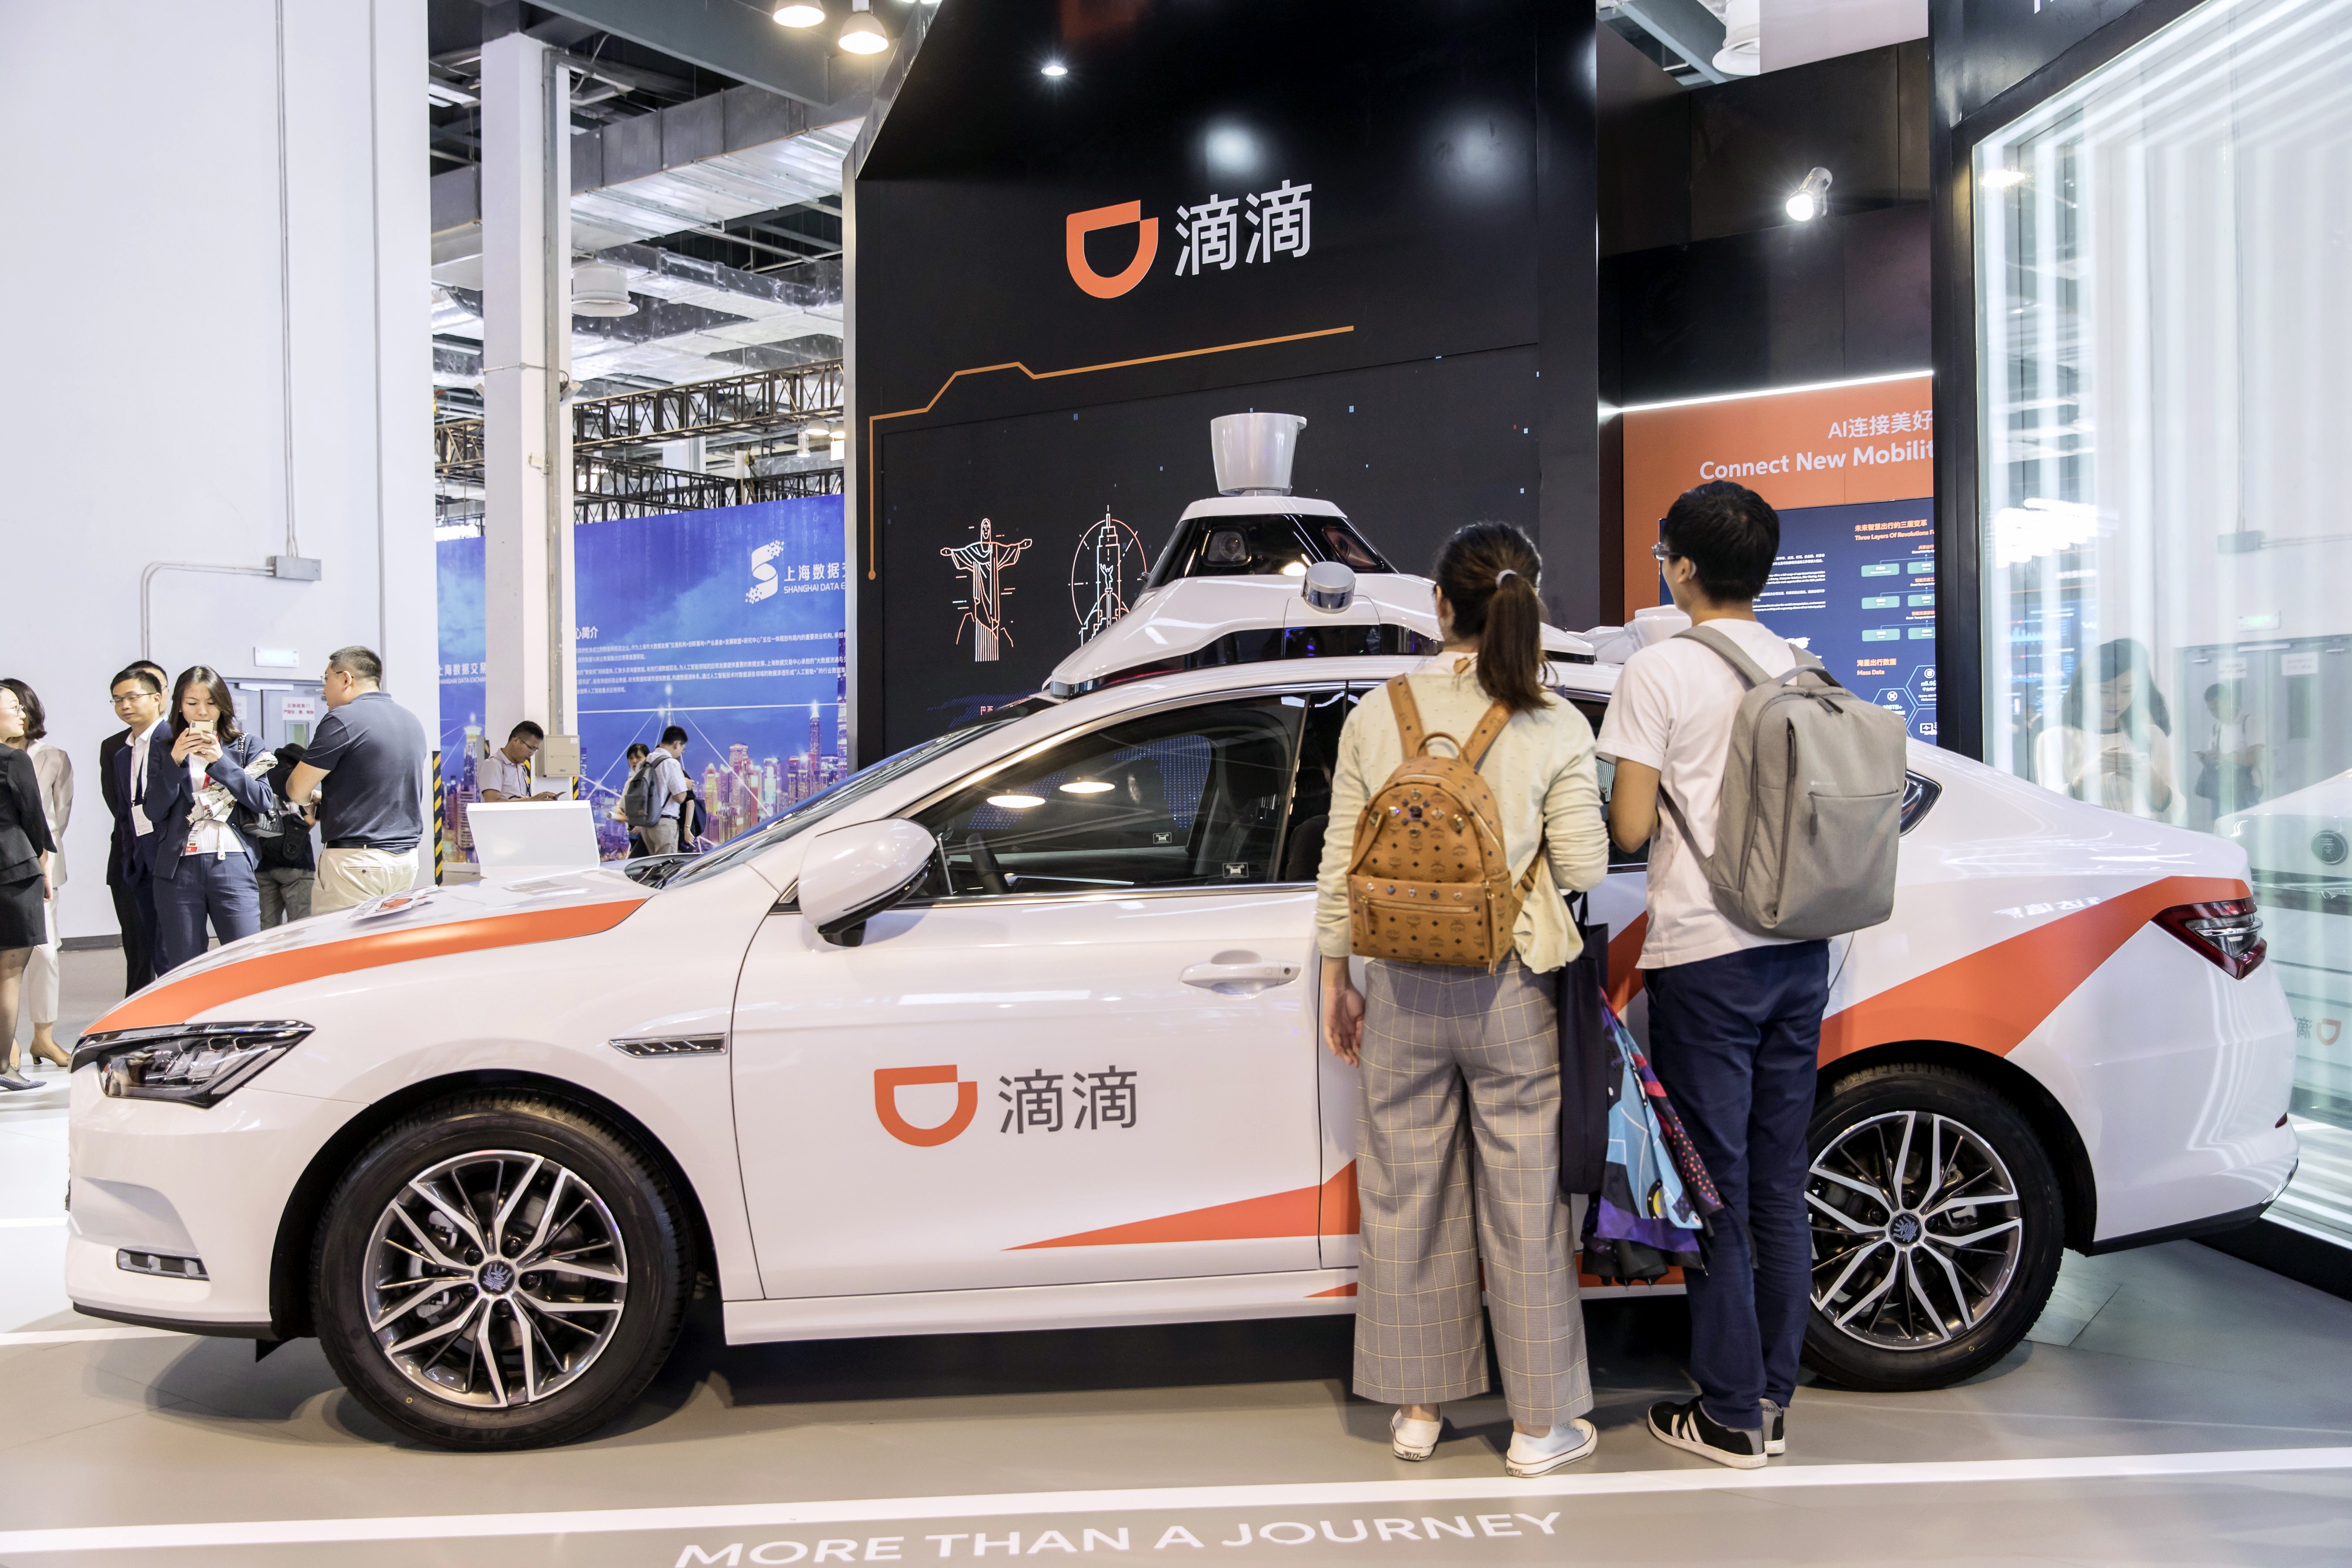 China’s Didi Chuxing is reopening its carpooling service this month. Photo: Reuters